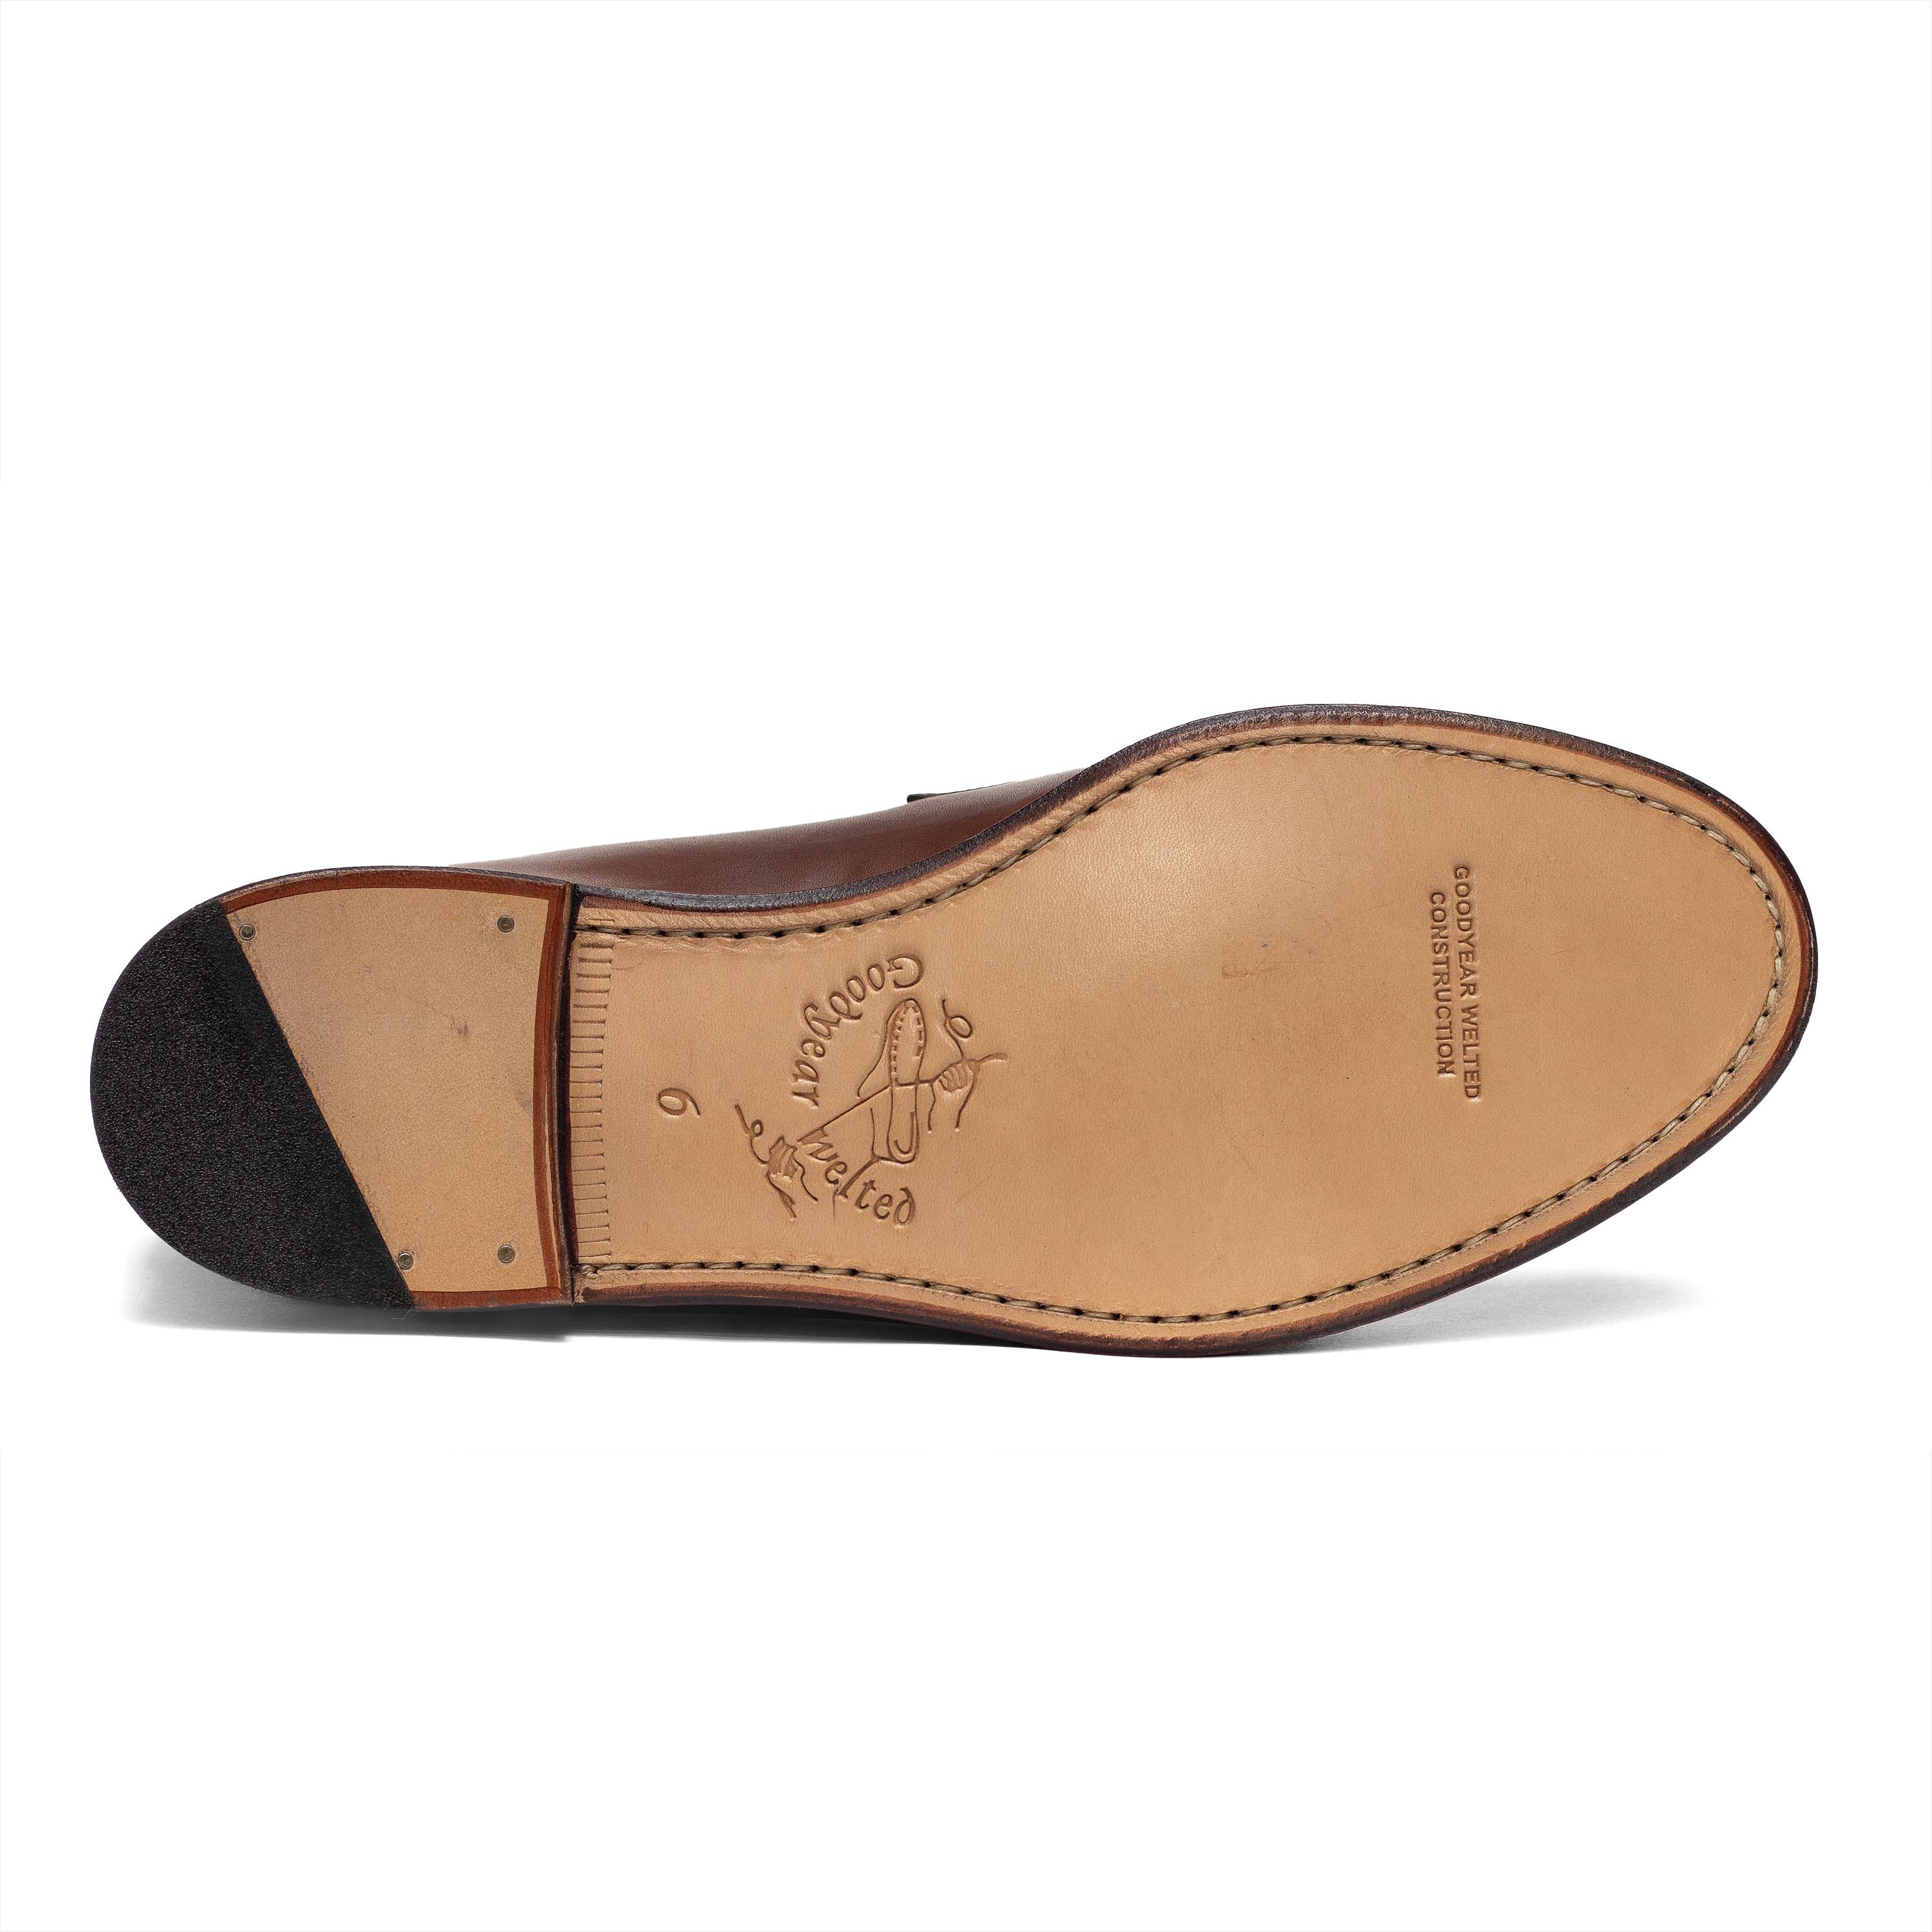 Men's Penny Loafer / Cuoio Calf 98998